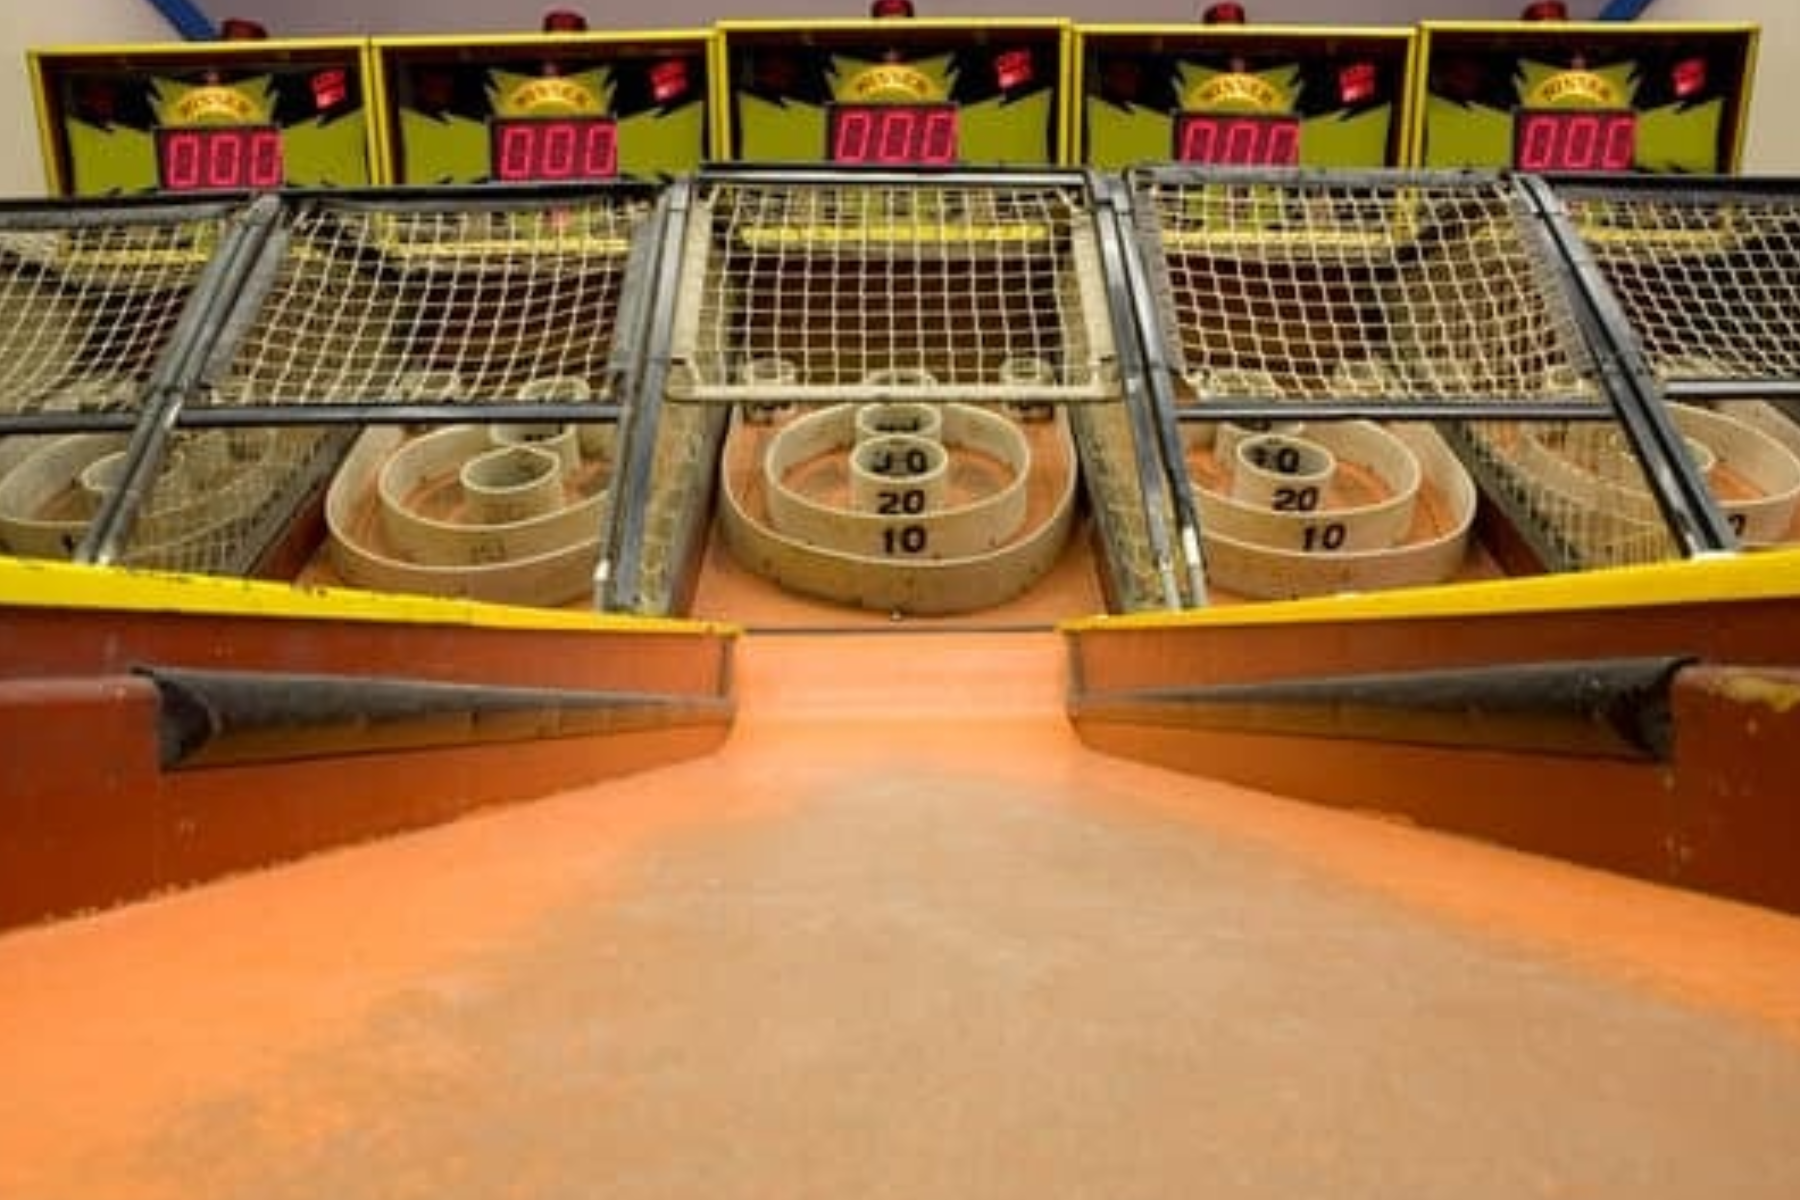 How To Make A Skee Ball - A Complete DIY Tutorial